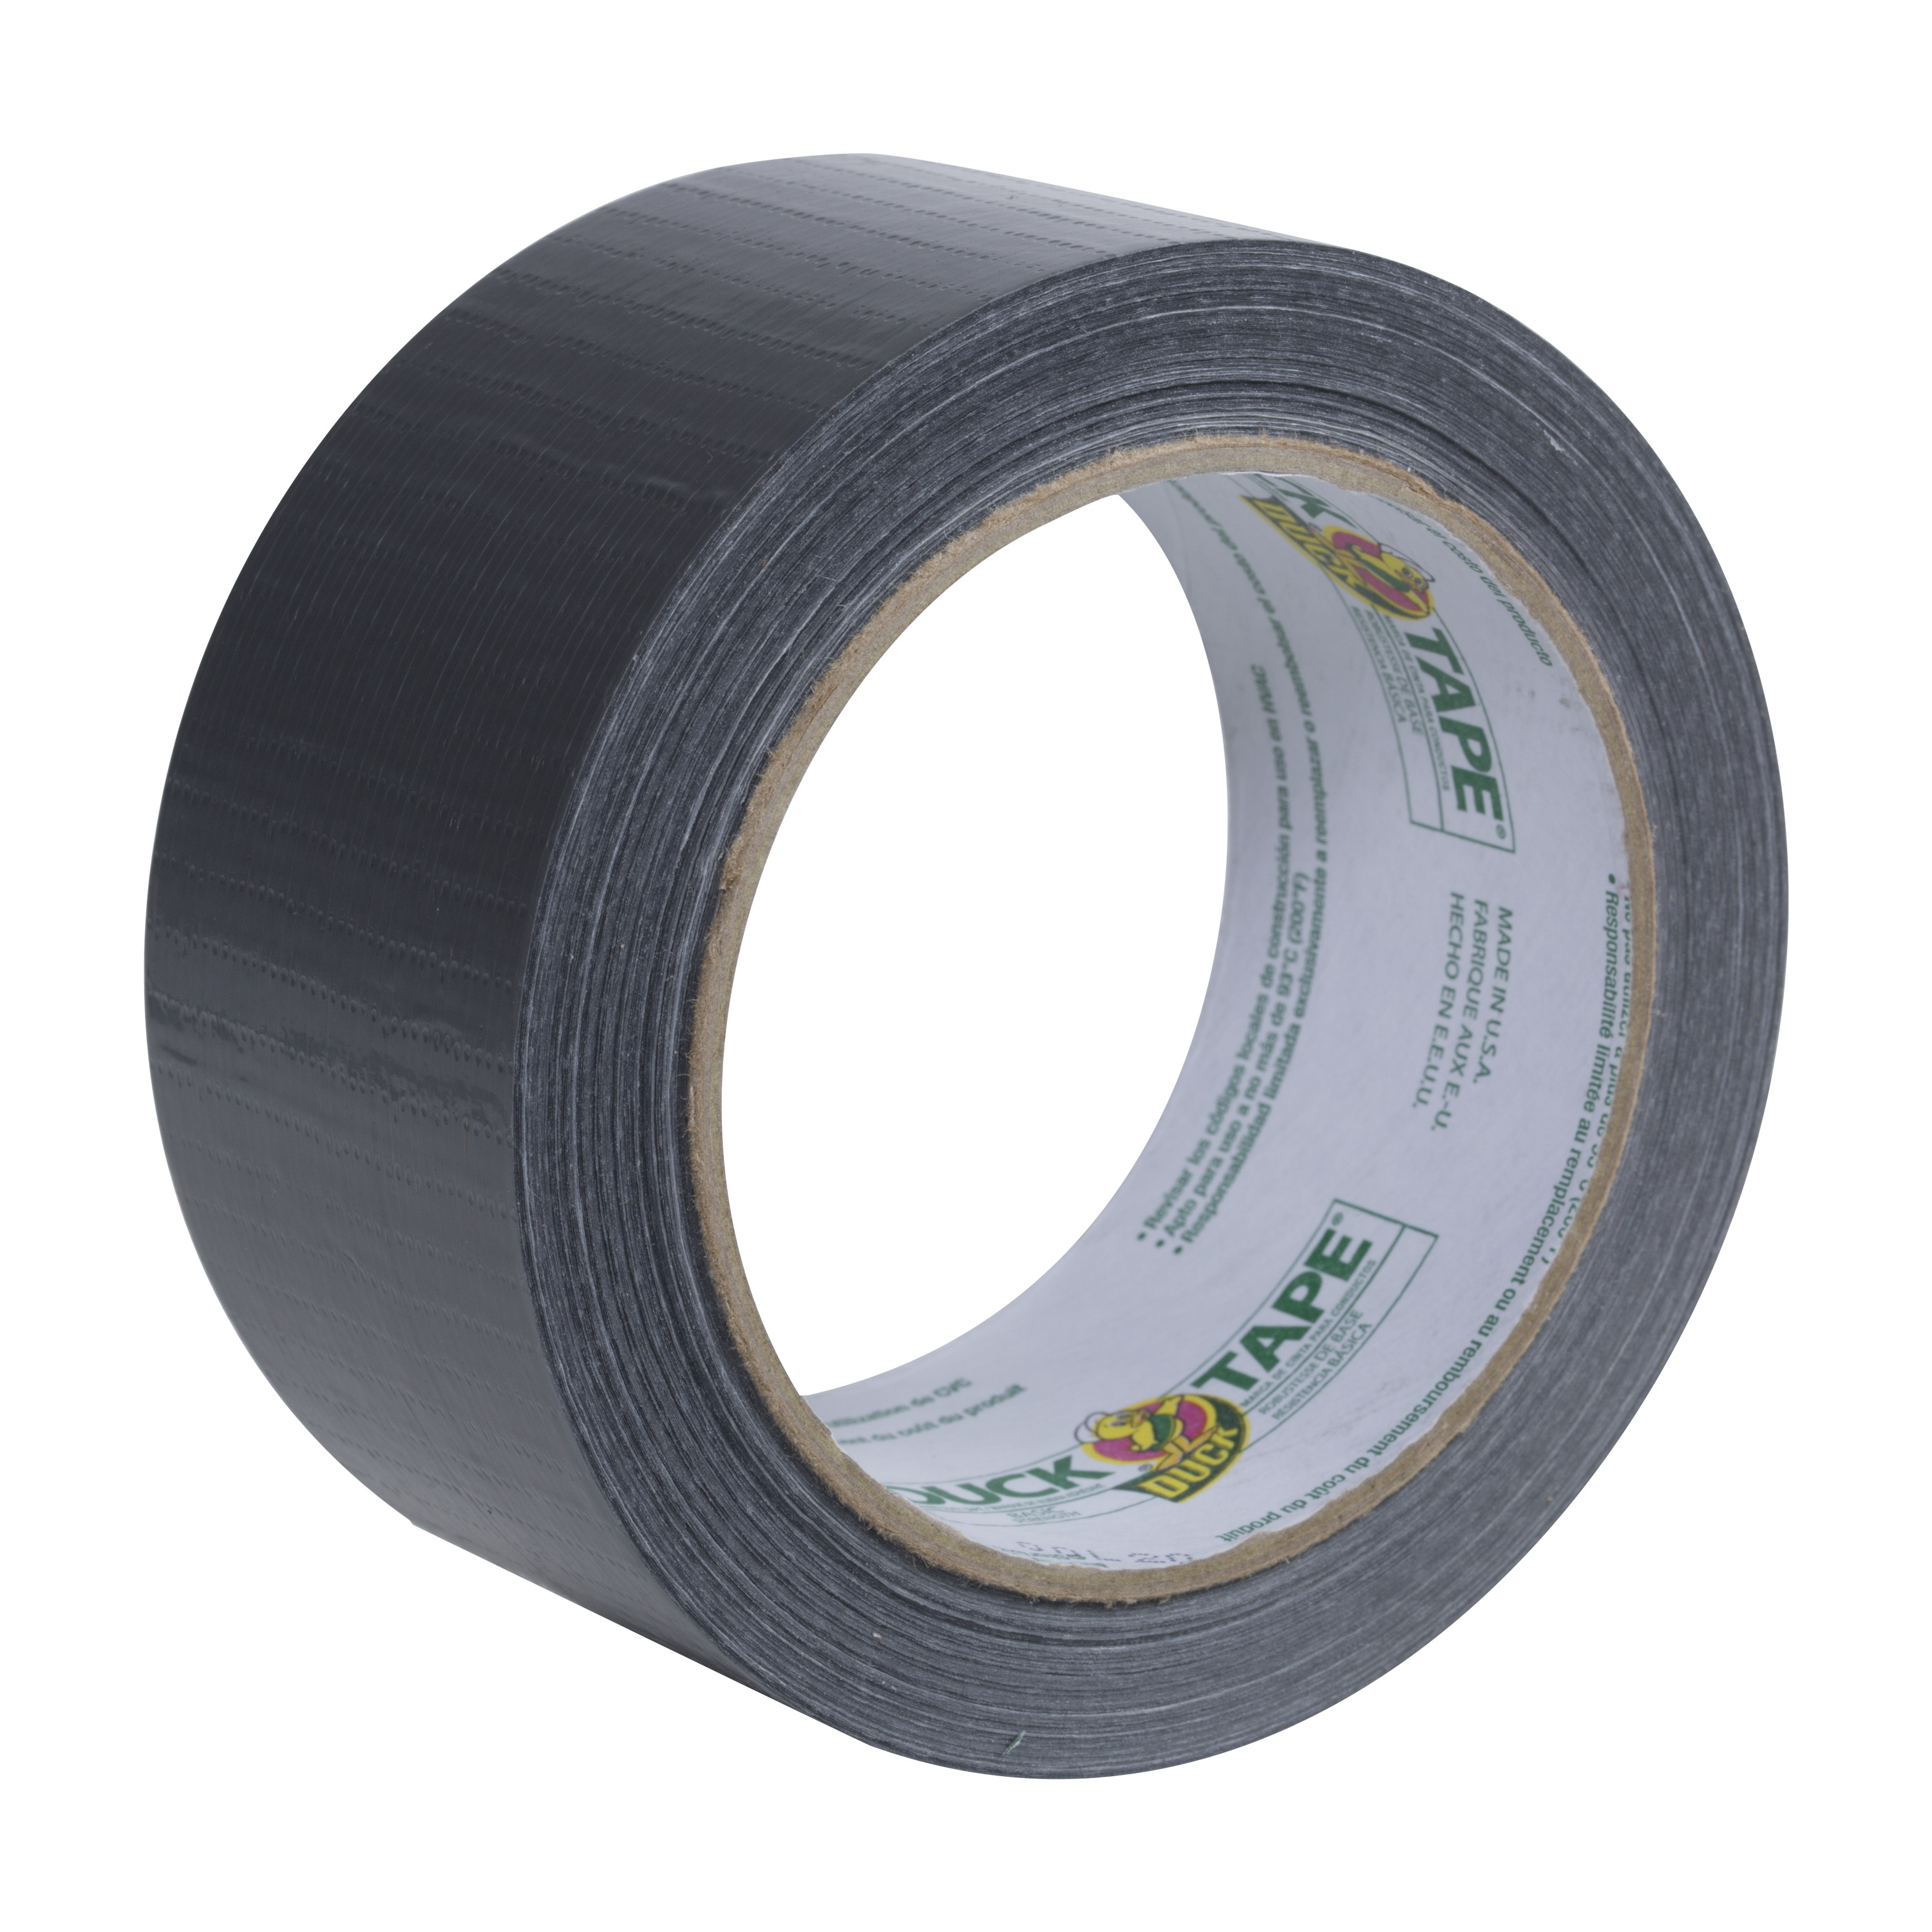 Duck Advance Strength Duct Tape, 1.88 in x 45 yd, Silver - image 3 of 10